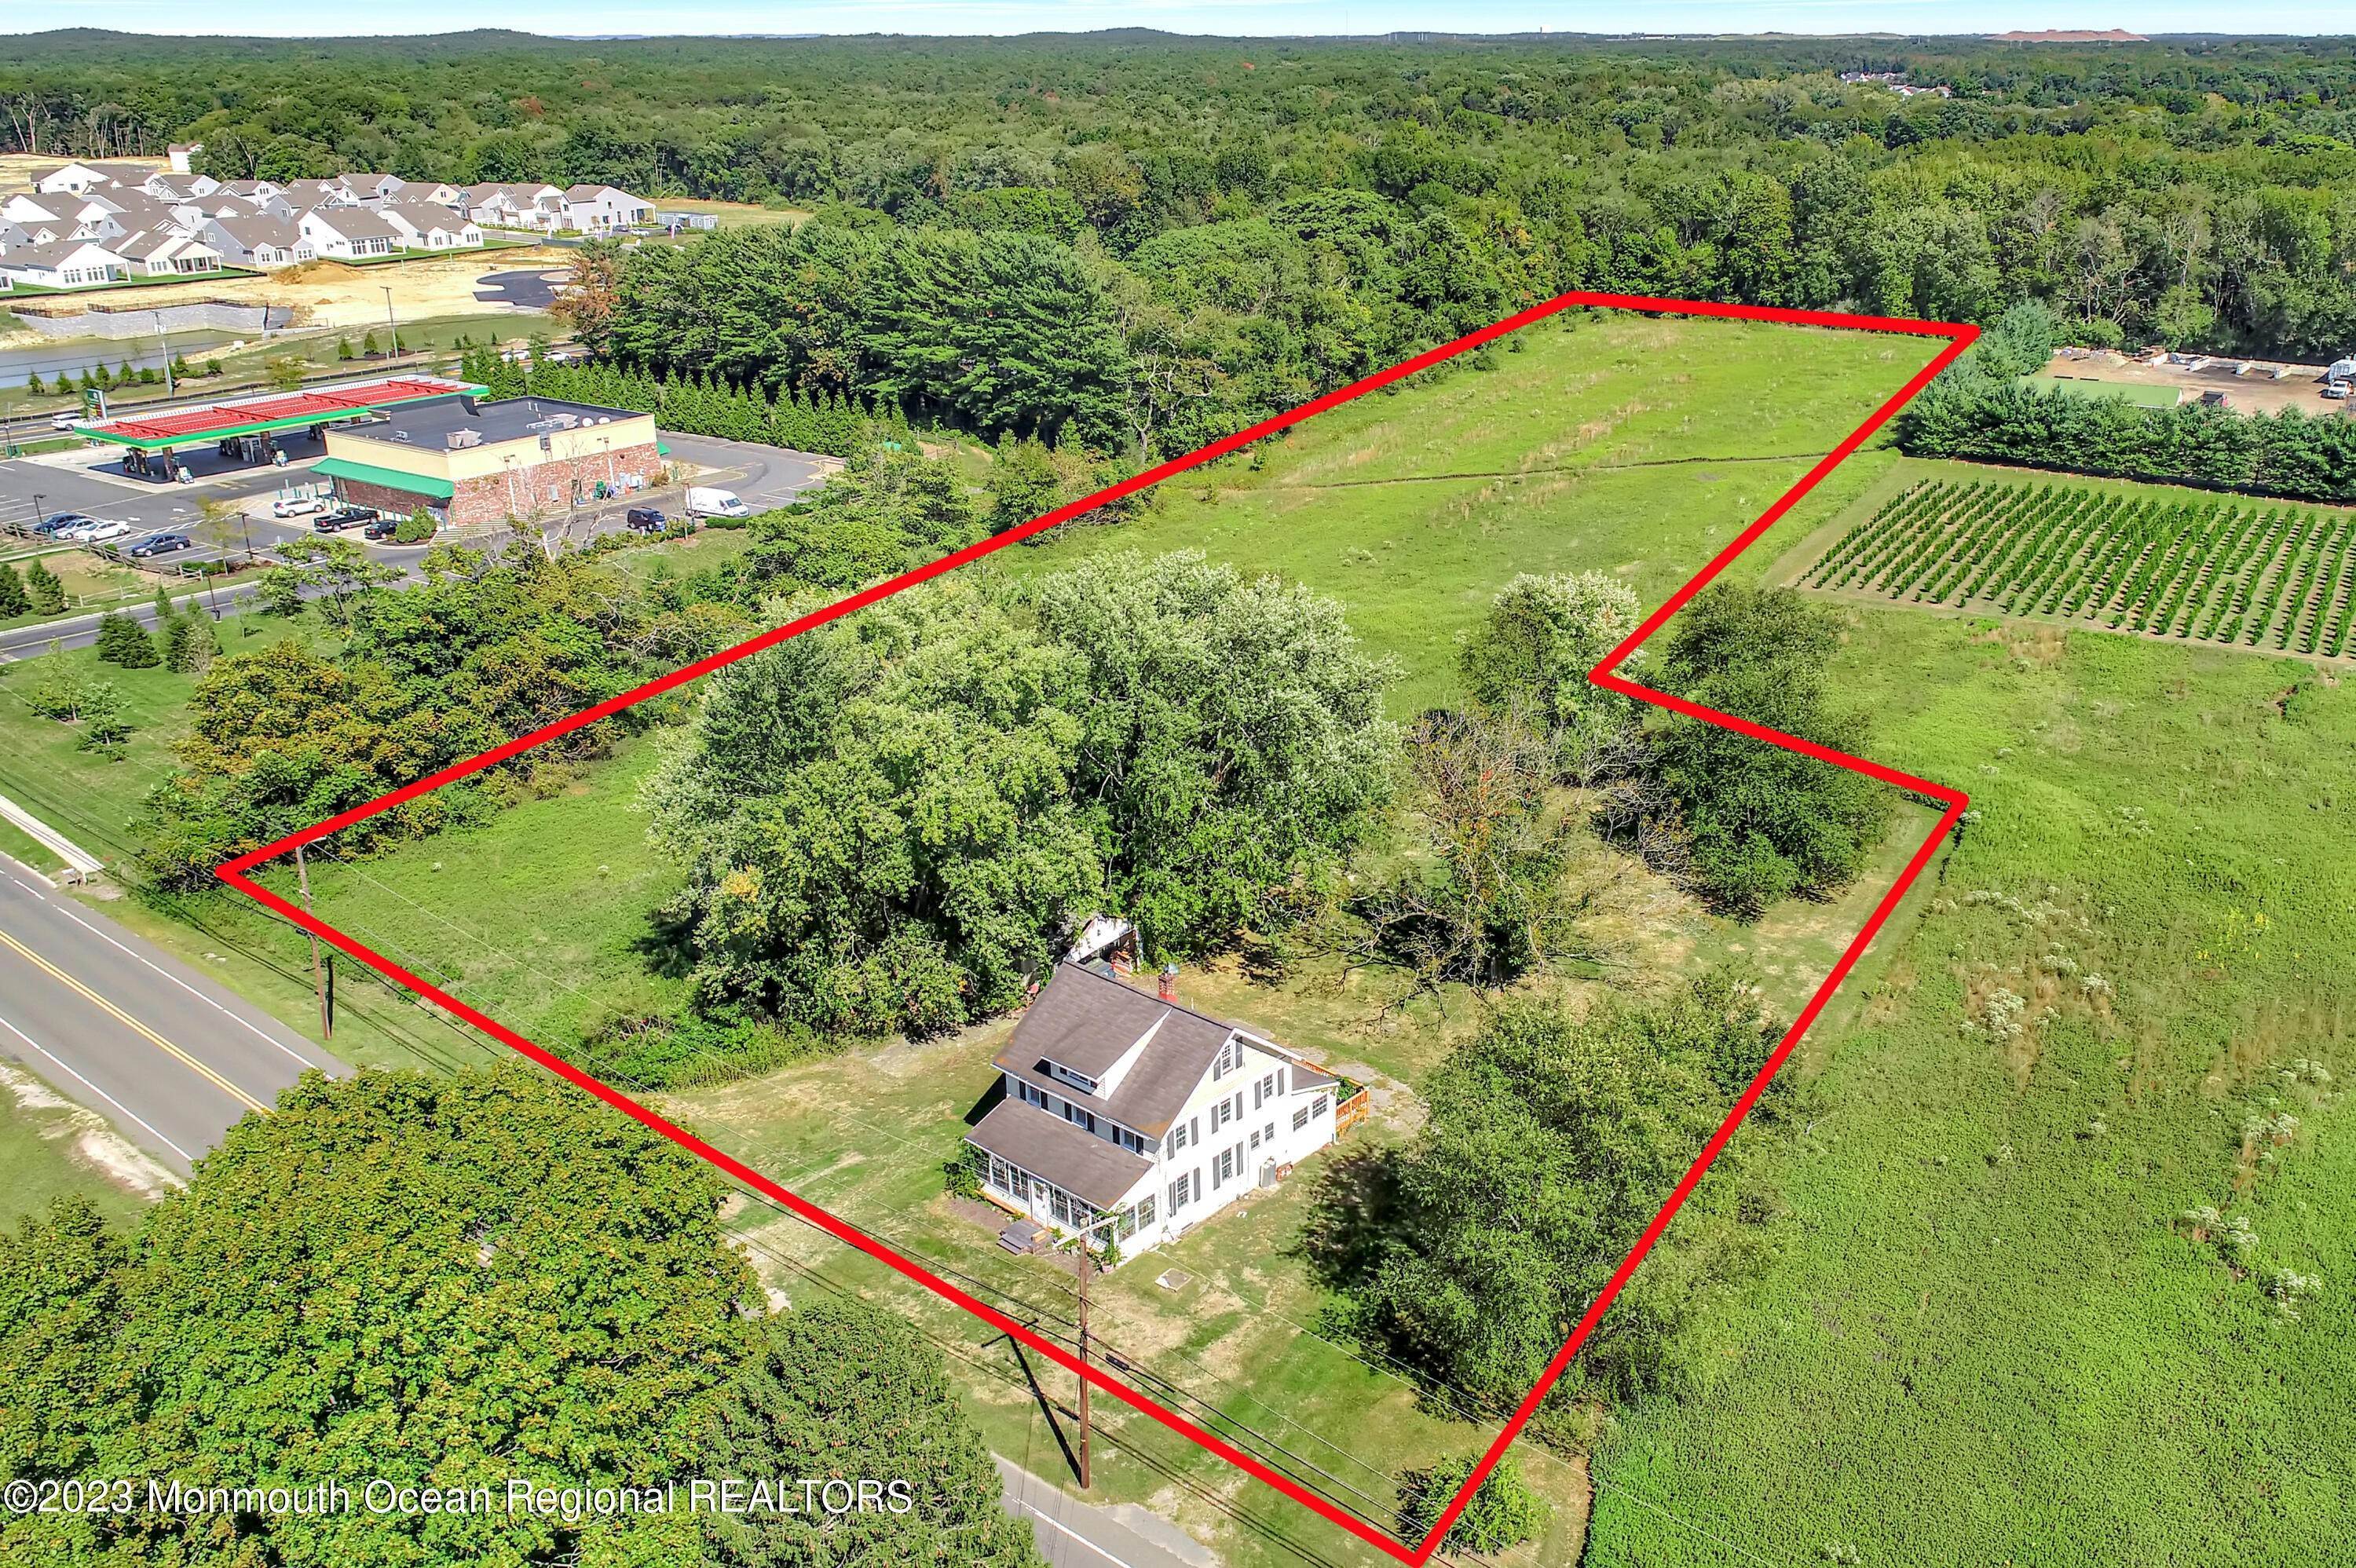 Property for Sale at 371 Colts Neck Road Farmingdale, New Jersey 07727 United States